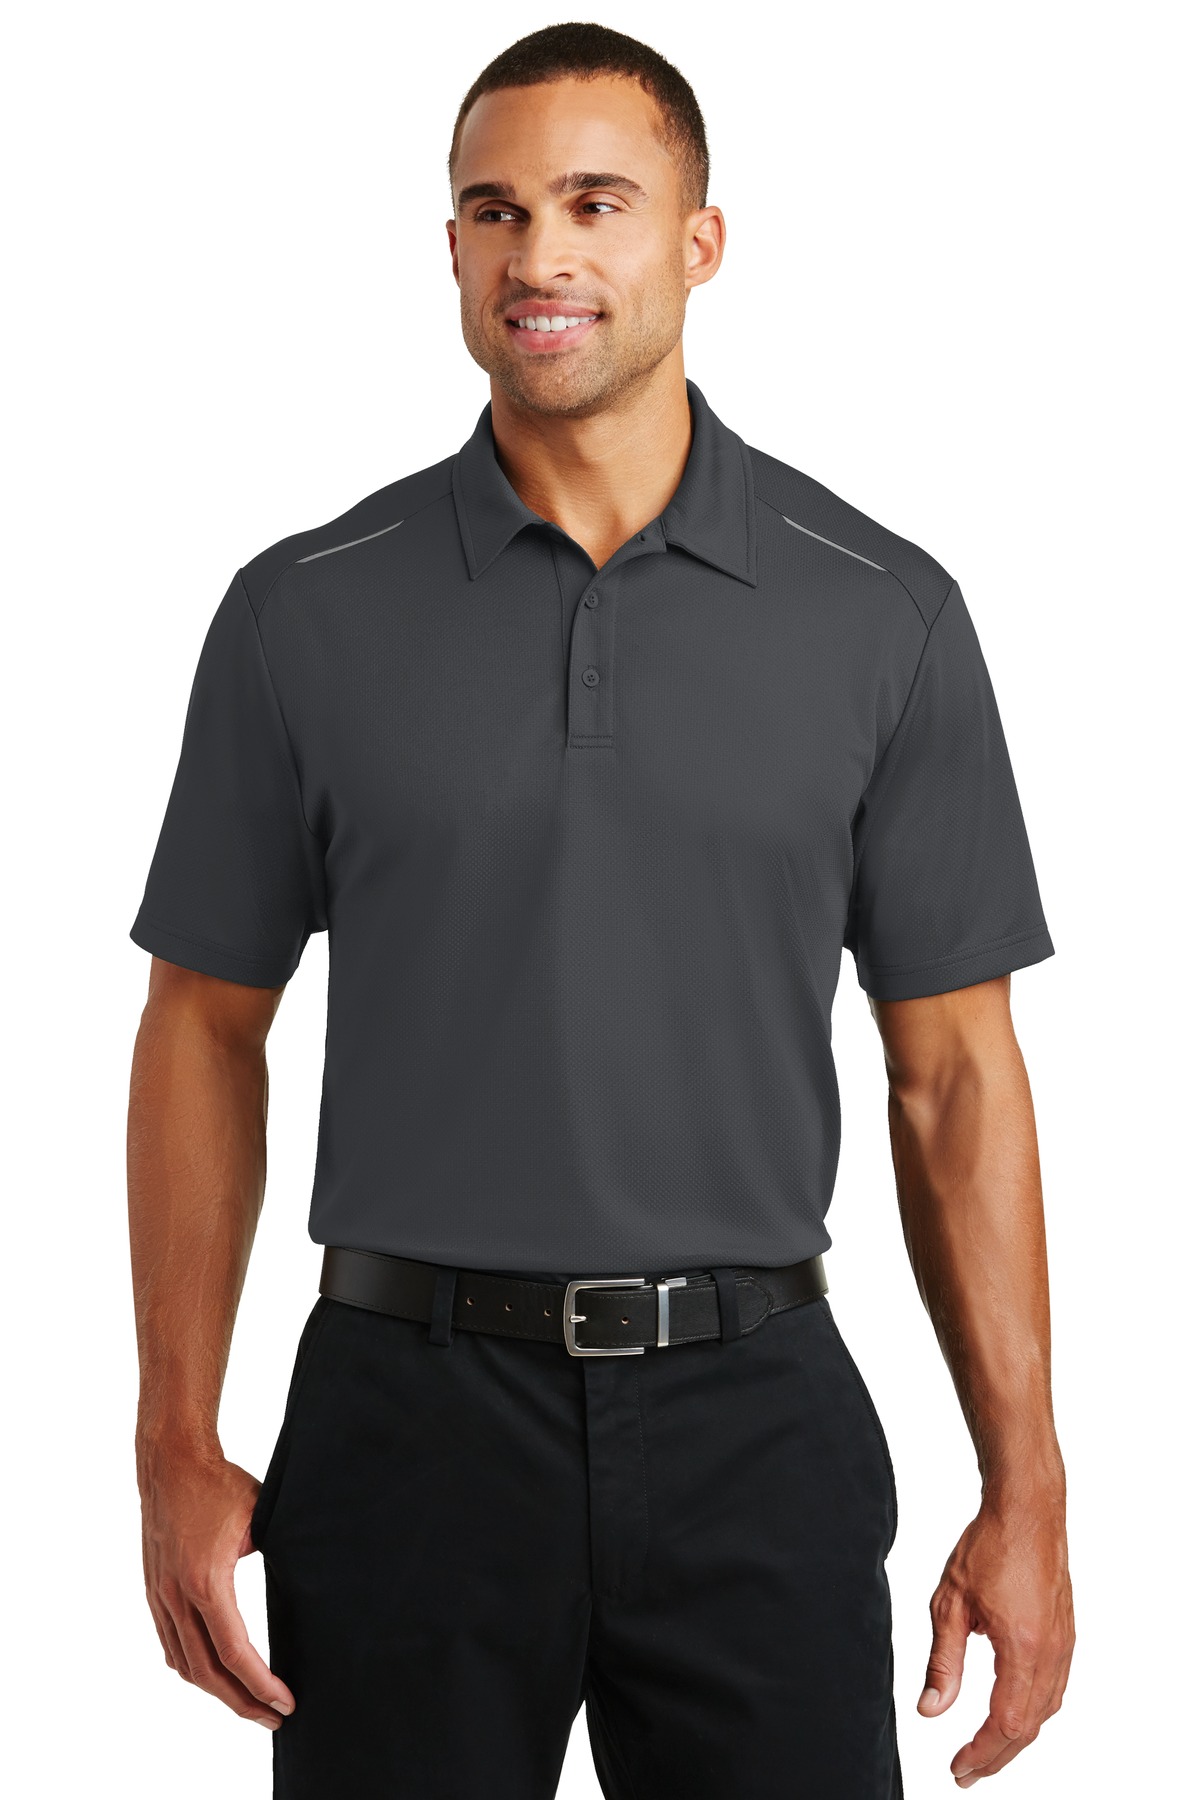 Port Authority Hospitality Polos & Knits ® Pinpoint Mesh Polo.-Port Authority